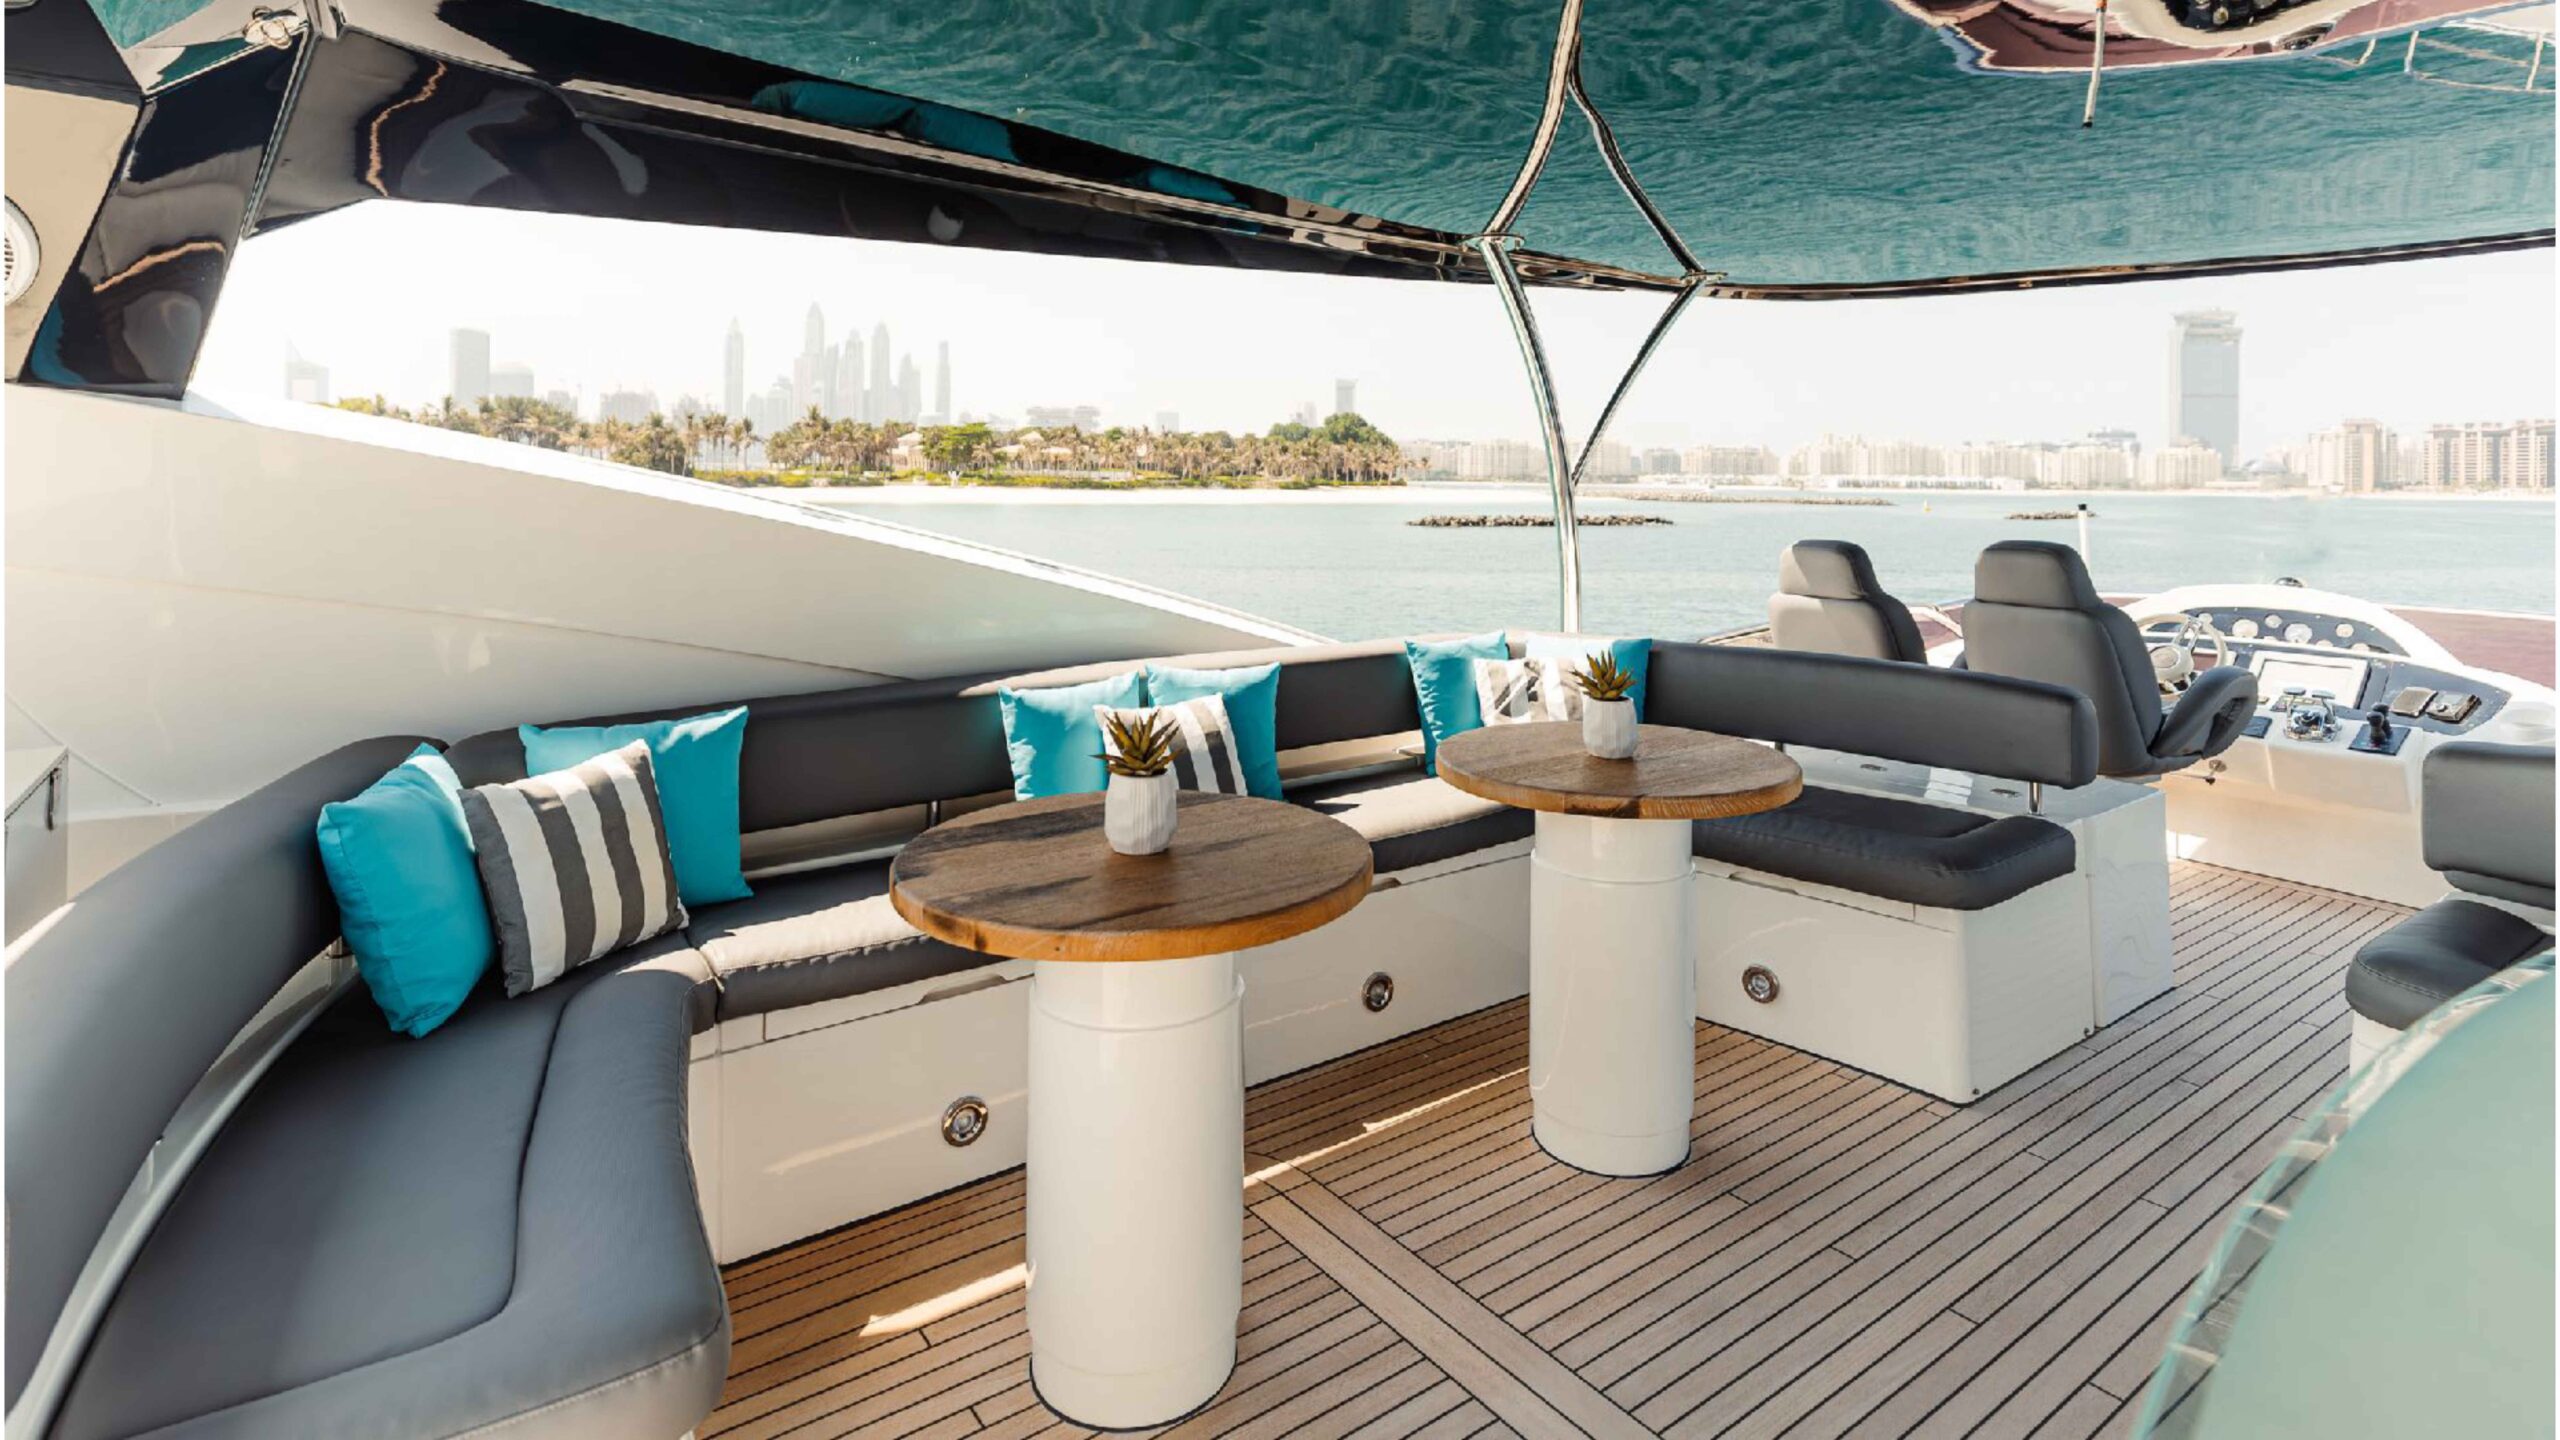  Eclipse Sovereign Majesty 90ft Yacht  yacht with best price in Dubai